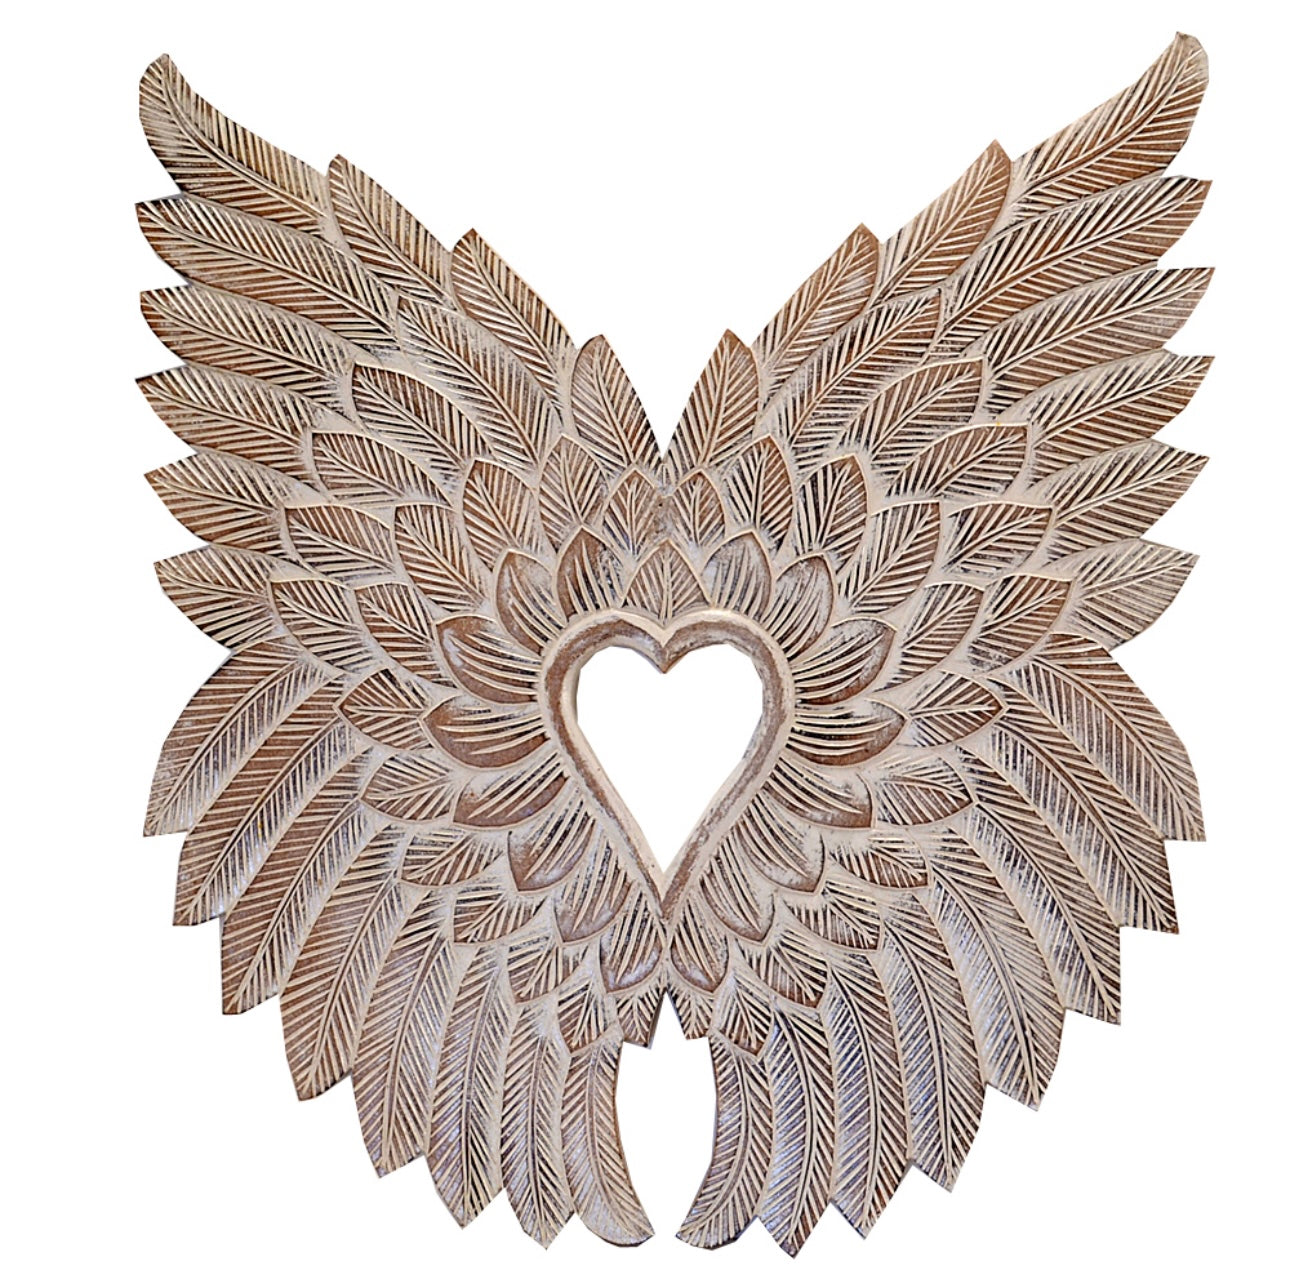 Stunning Large Natural White Wash Wood Angel Wings ~ 50cm x 40cm Wall Decor